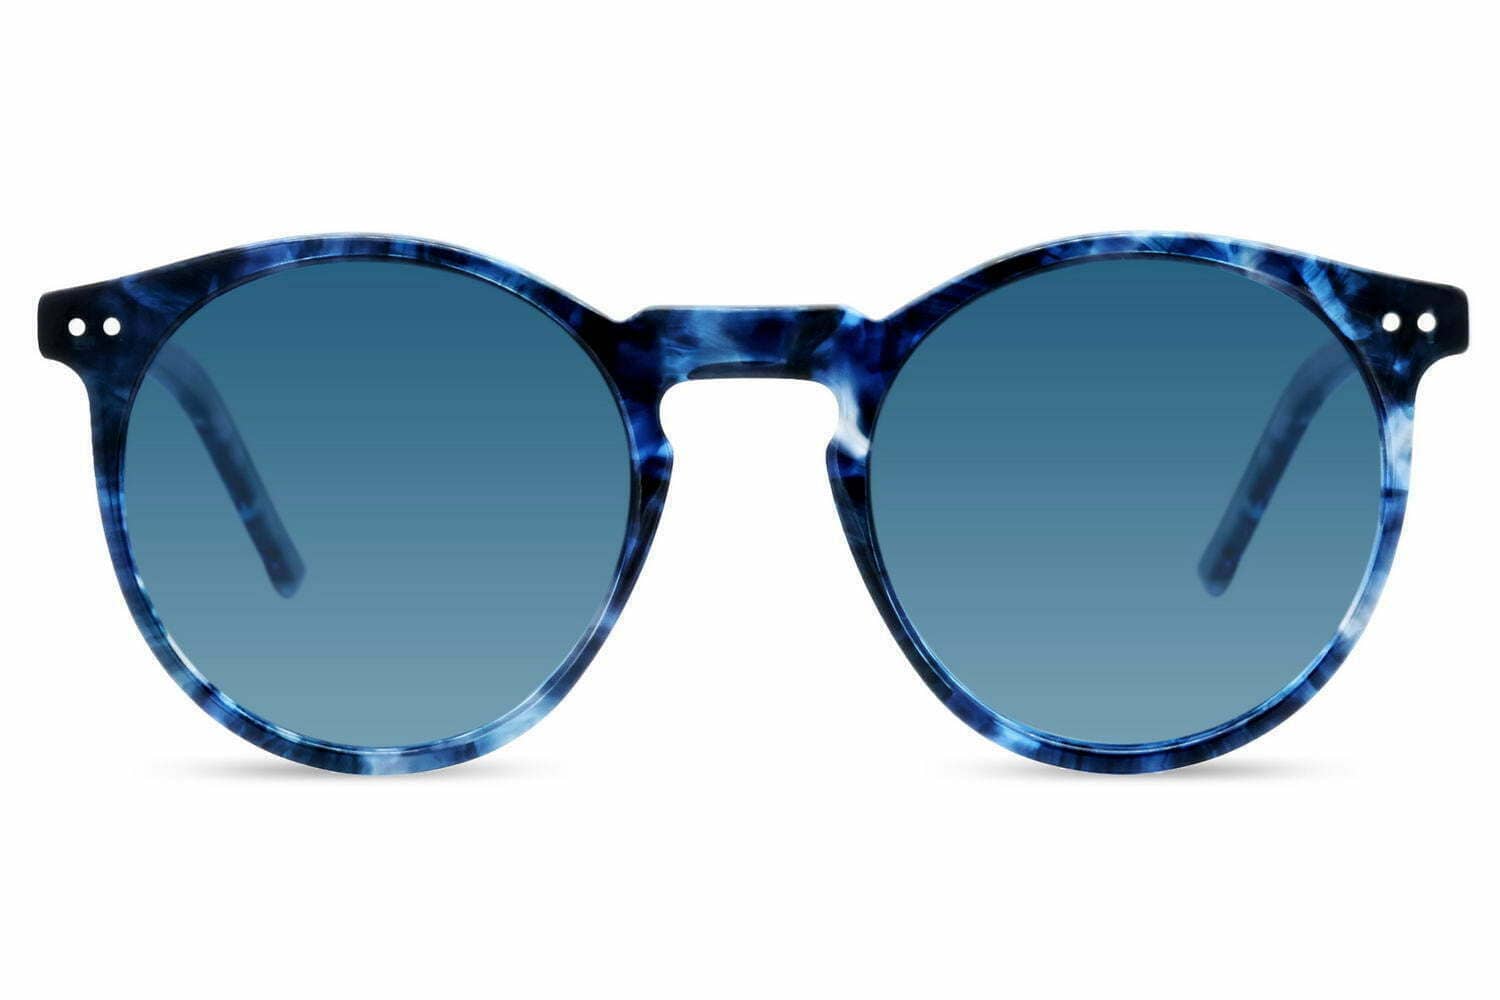 Althea sunglasses with Blue color lens and Blue color frame